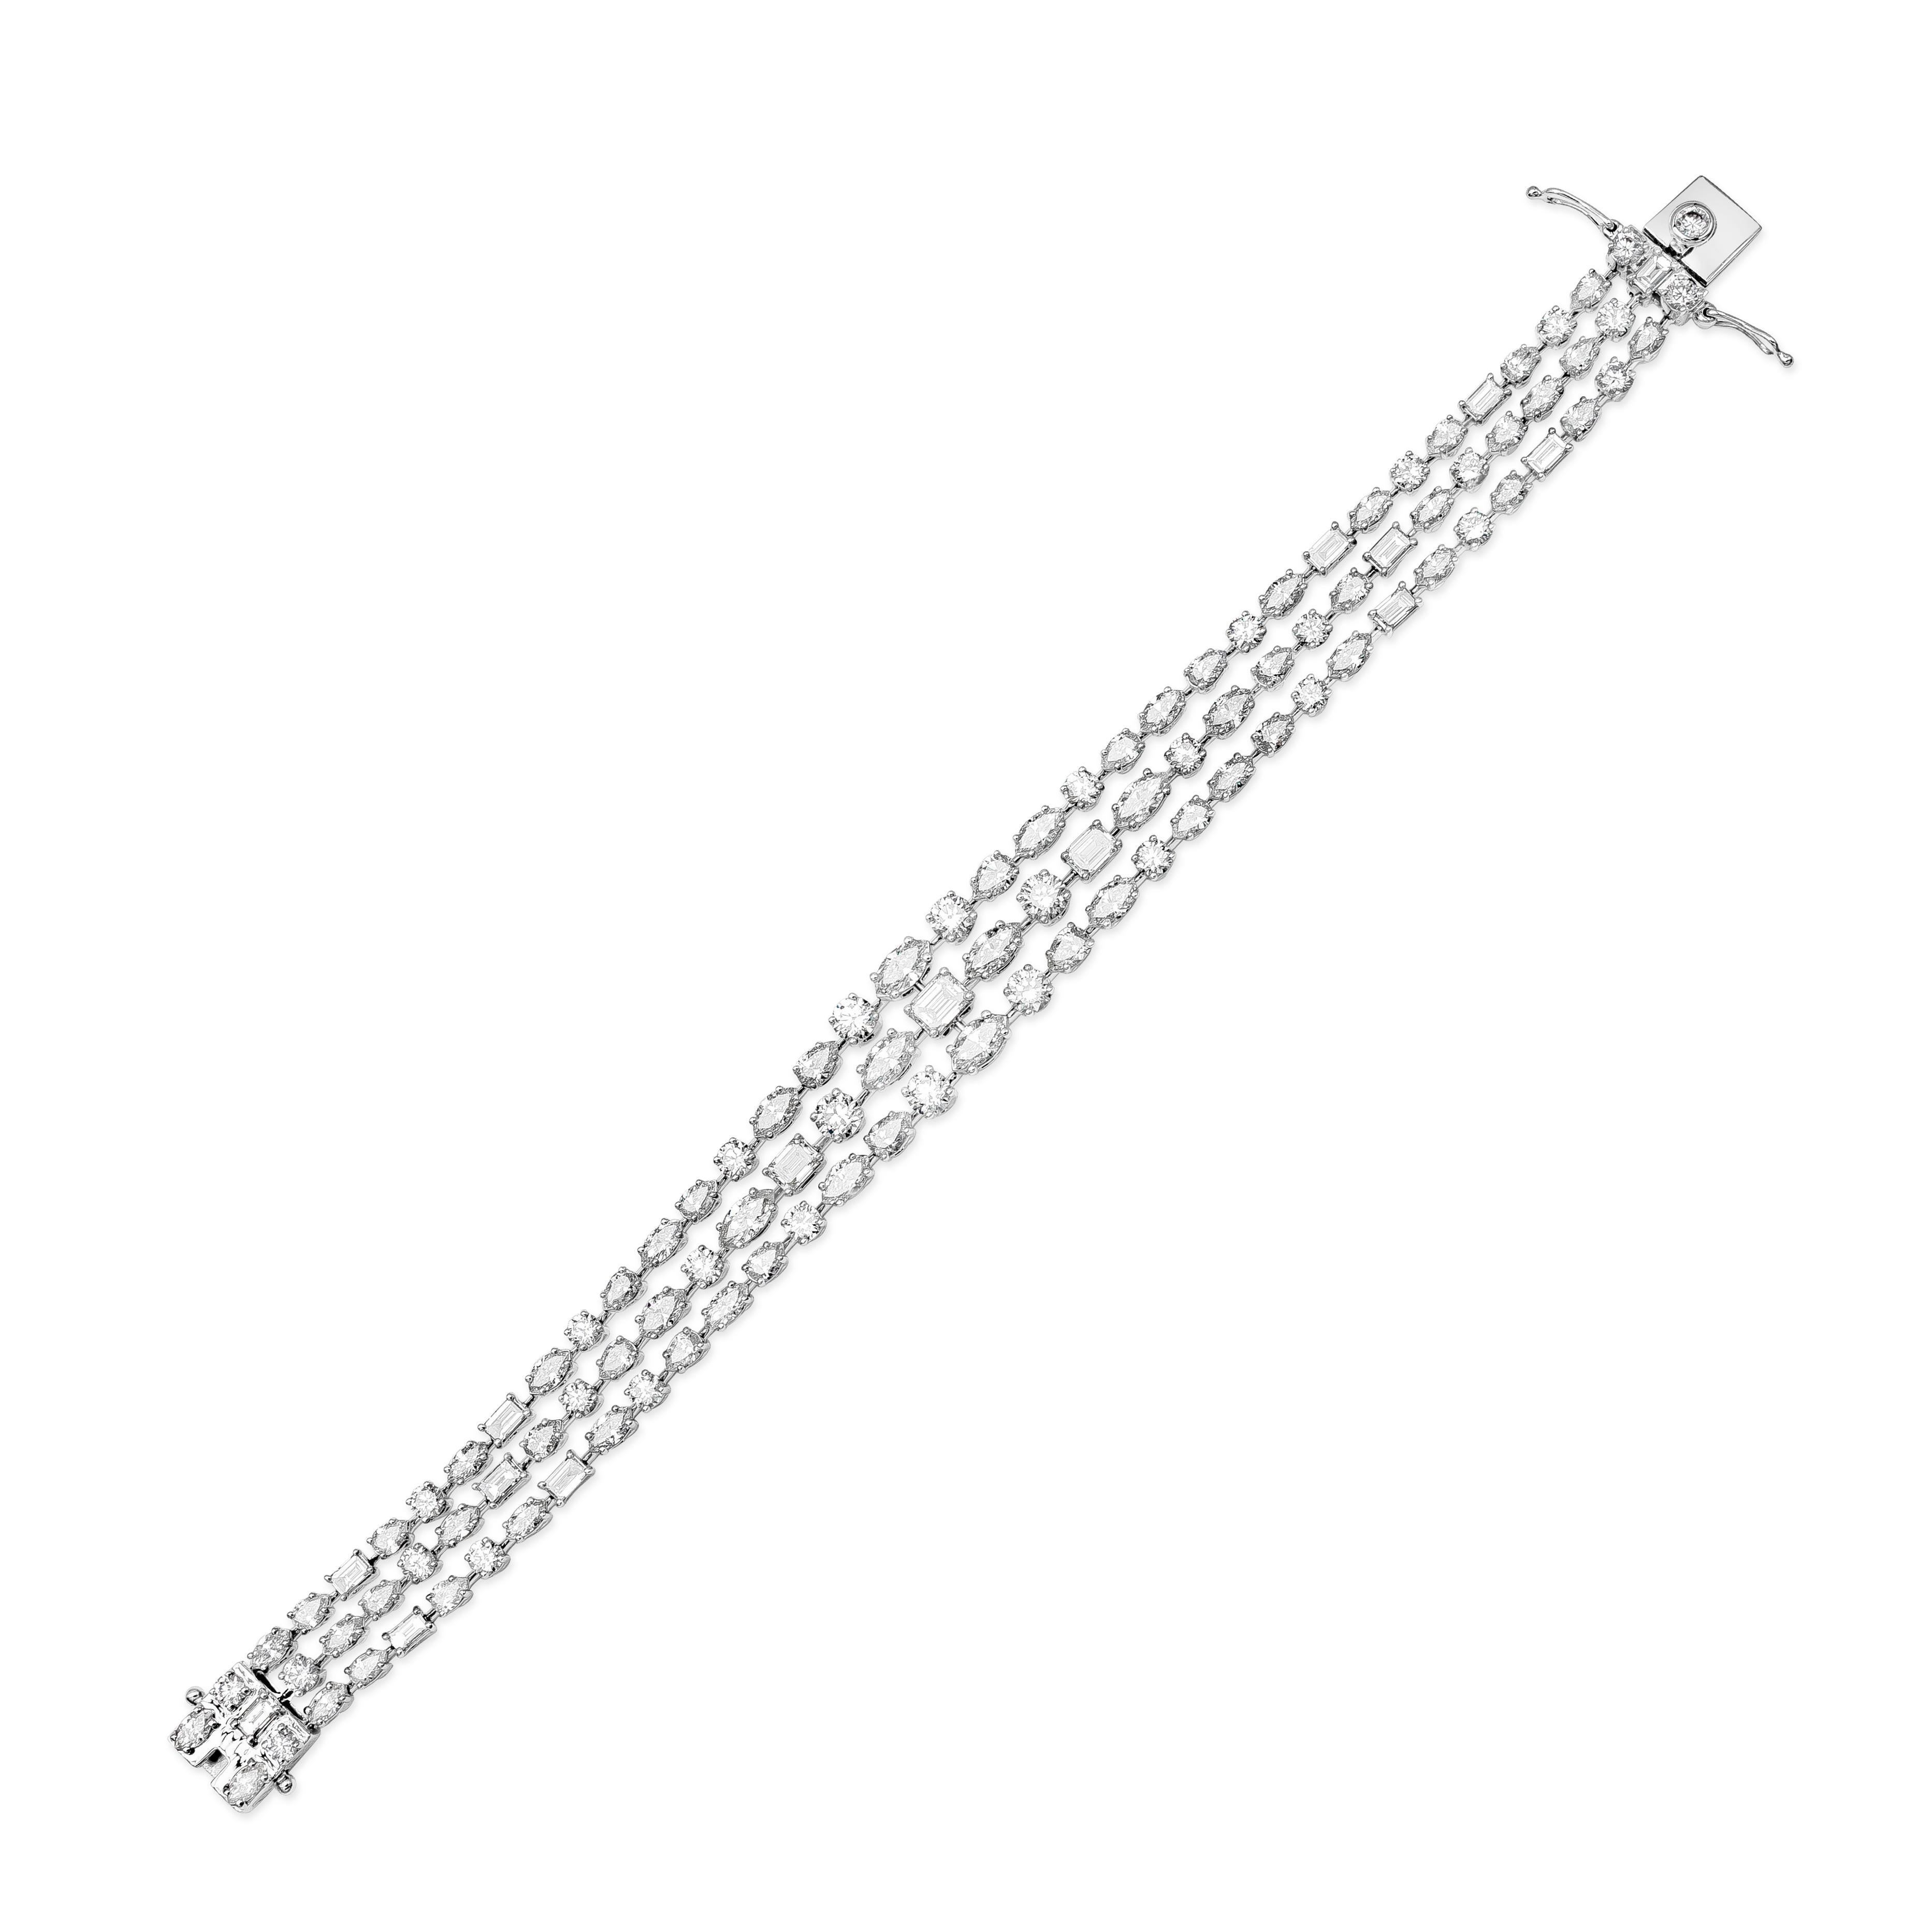 This elegant and fashionable bracelet showcasing three-rows of Fancy shape diamonds that graduate larger as it gets to the center. Diamonds weigh 12.03 carats total and are approximately G-H color, VS-SI clarity. Made with 18k White Gold.

Roman